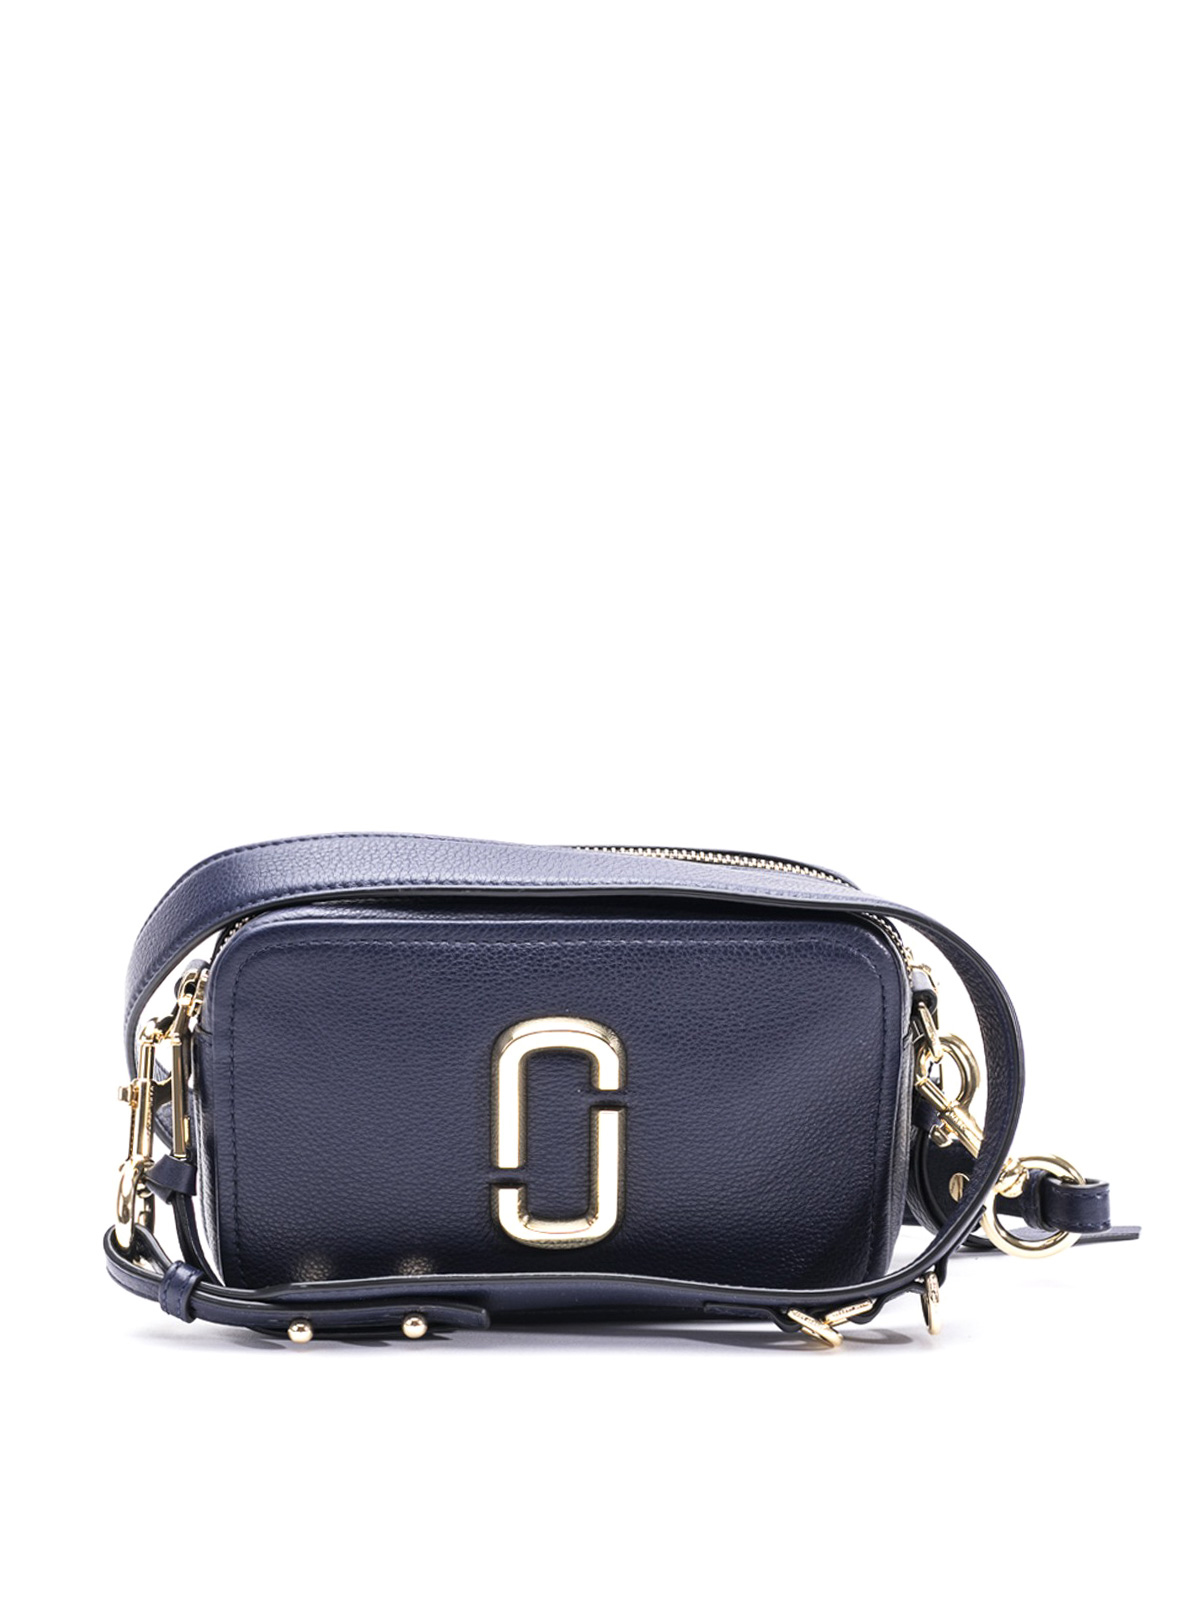 The softshot leather crossbody bag Marc Jacobs Black in Leather